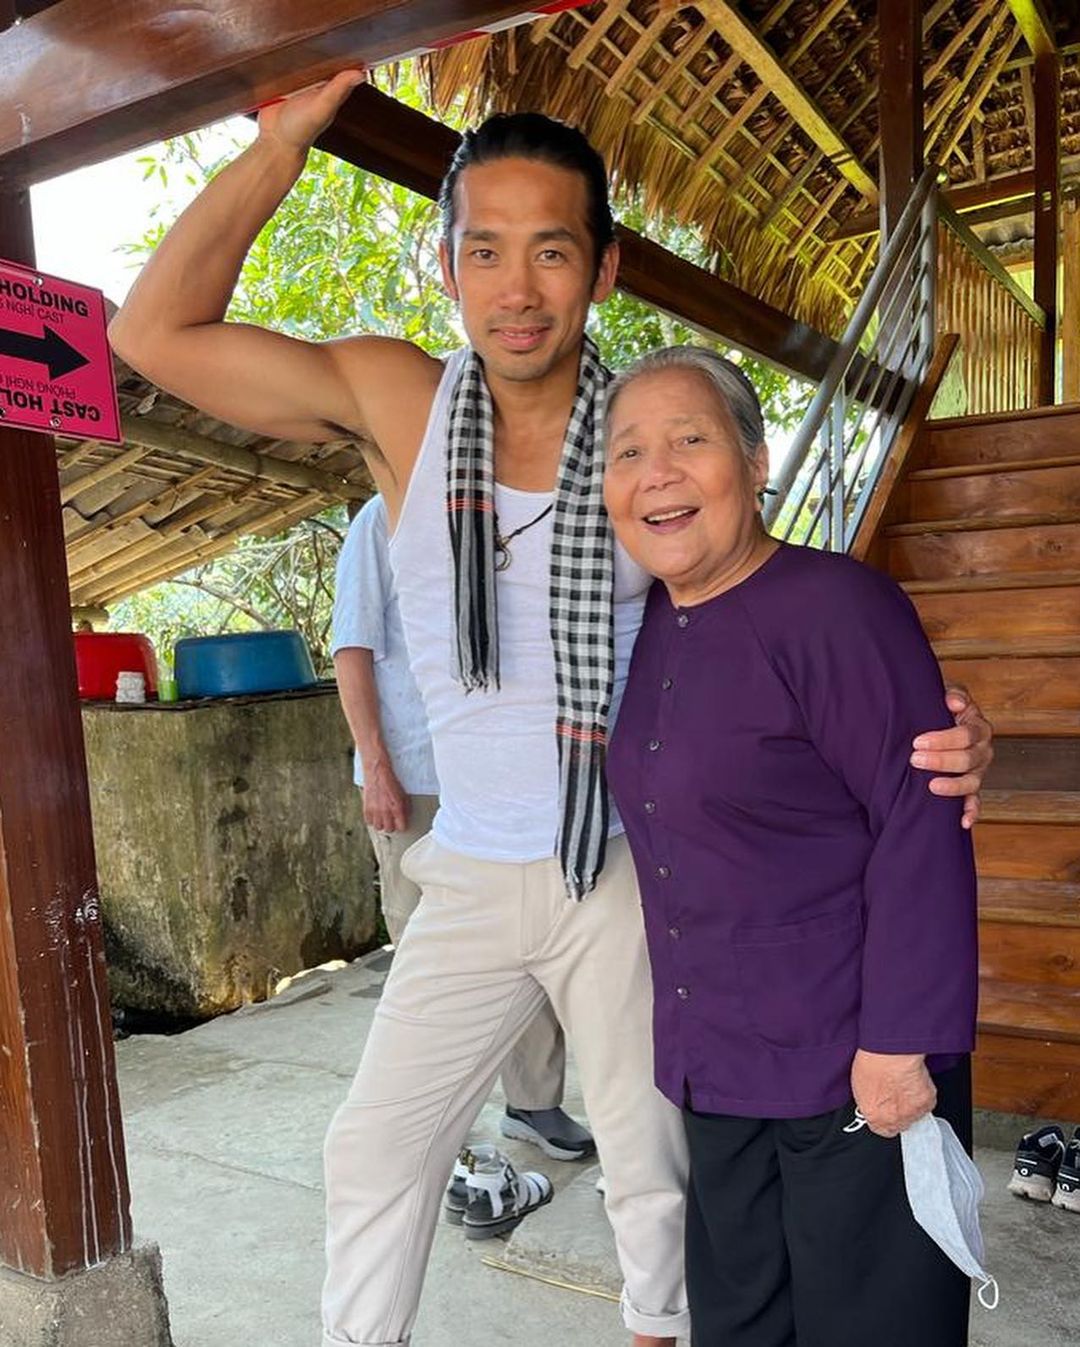 Scott Ly posed for a picture with Le Thein, who is also featured in his upcoming Netflix movie 